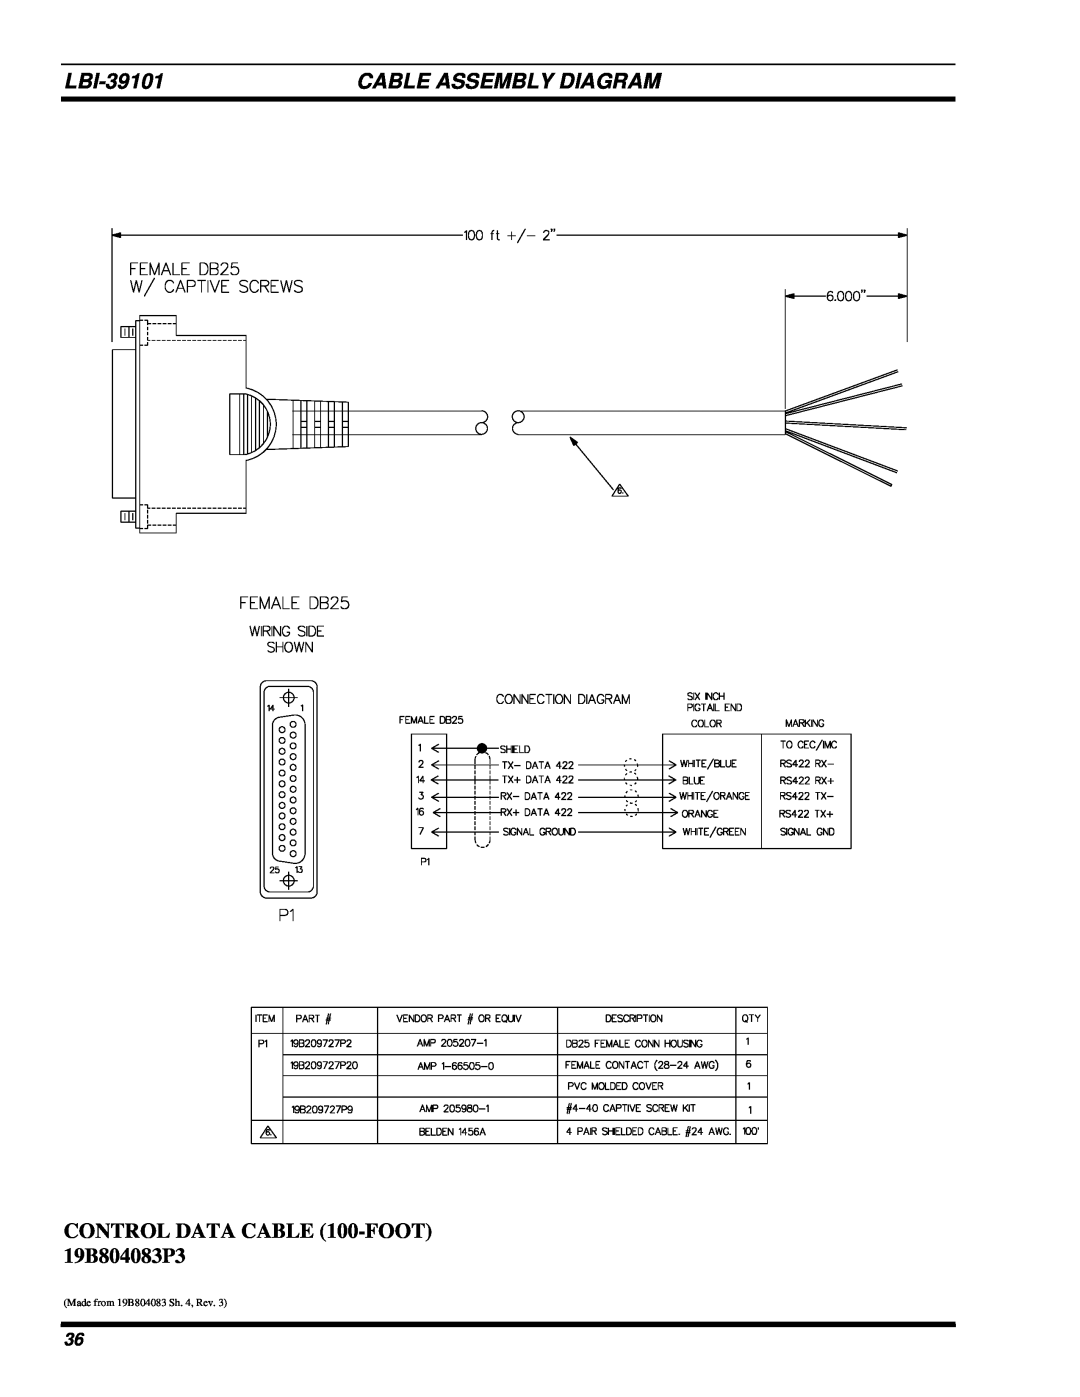 Ericsson LBI-39101A manual Cable Assembly Diagram, CONTROL DATA CABLE 100-FOOT19B804083P3, Made from 19B804083 Sh. 4, Rev 